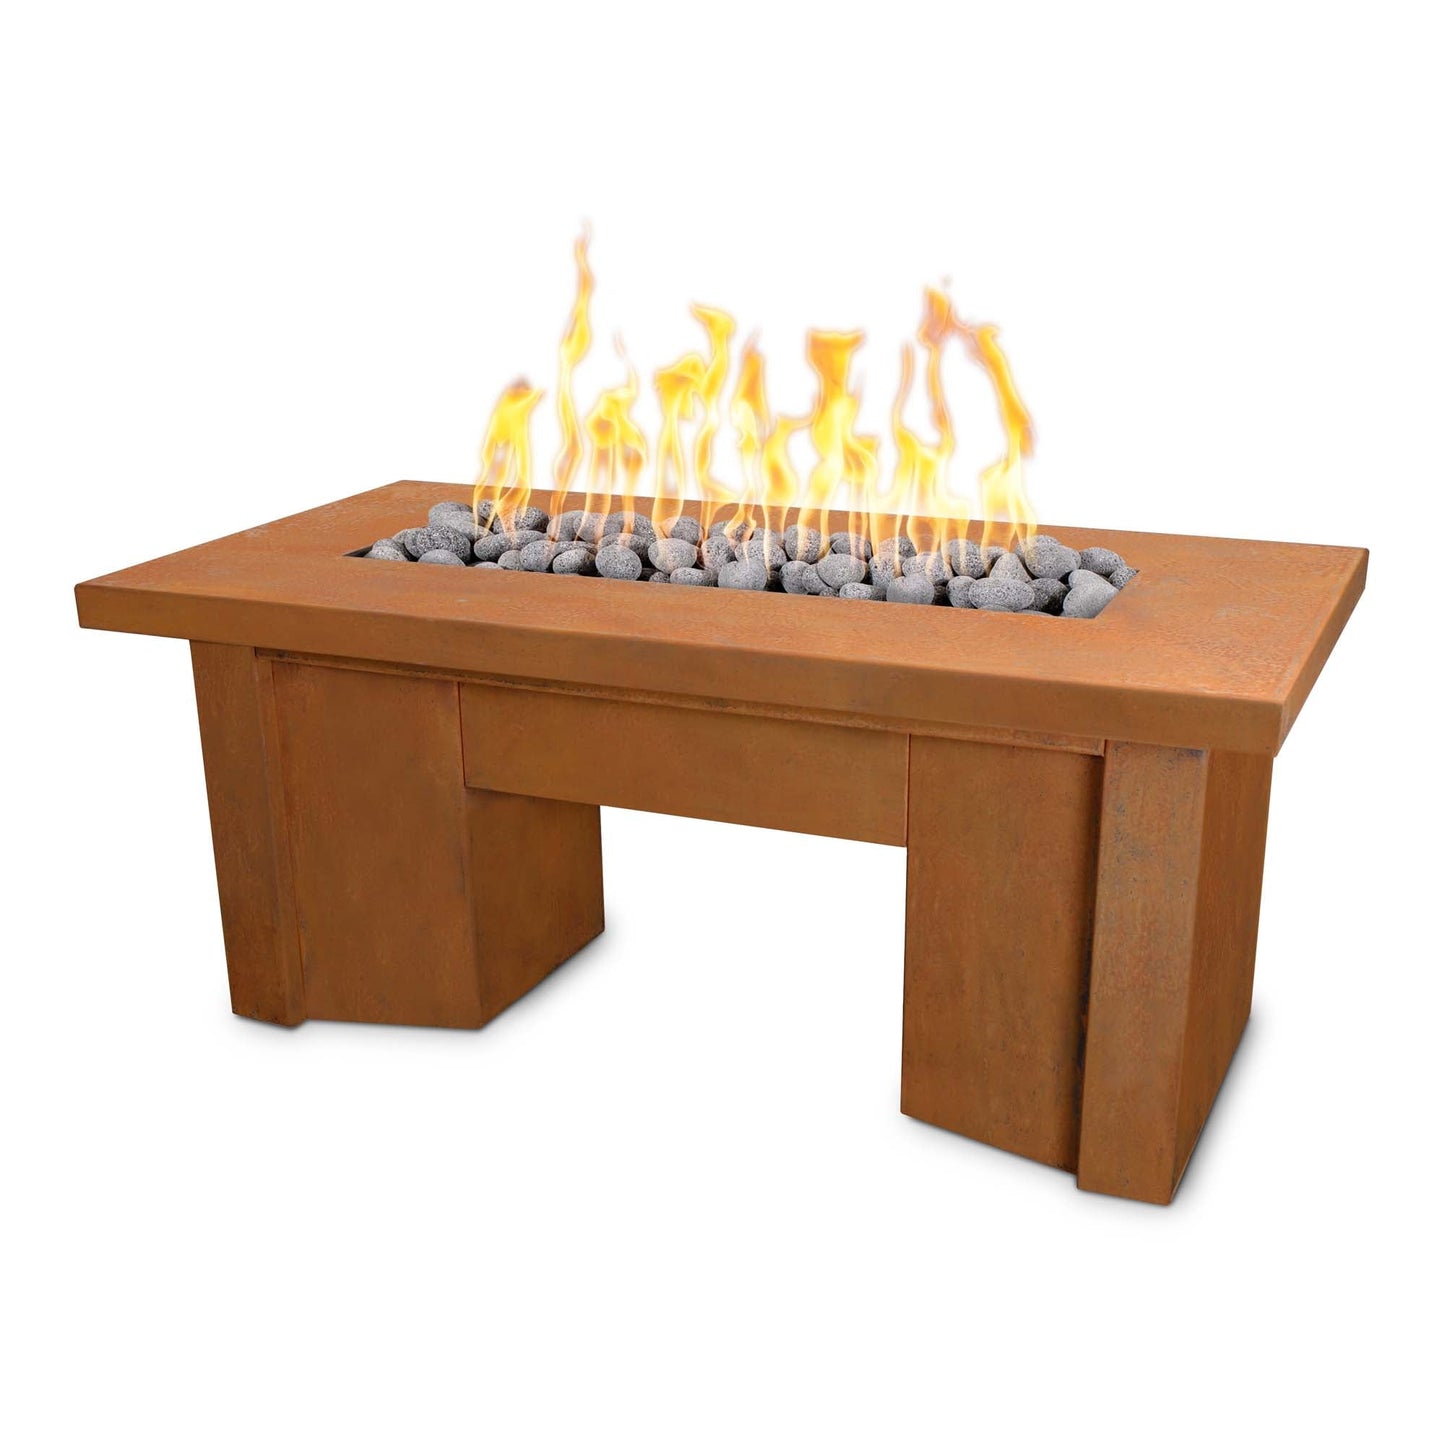 The Outdoor Plus Rectangular Alameda 48" Corten Steel Natural Gas Fire Pit with Match Lit Ignition